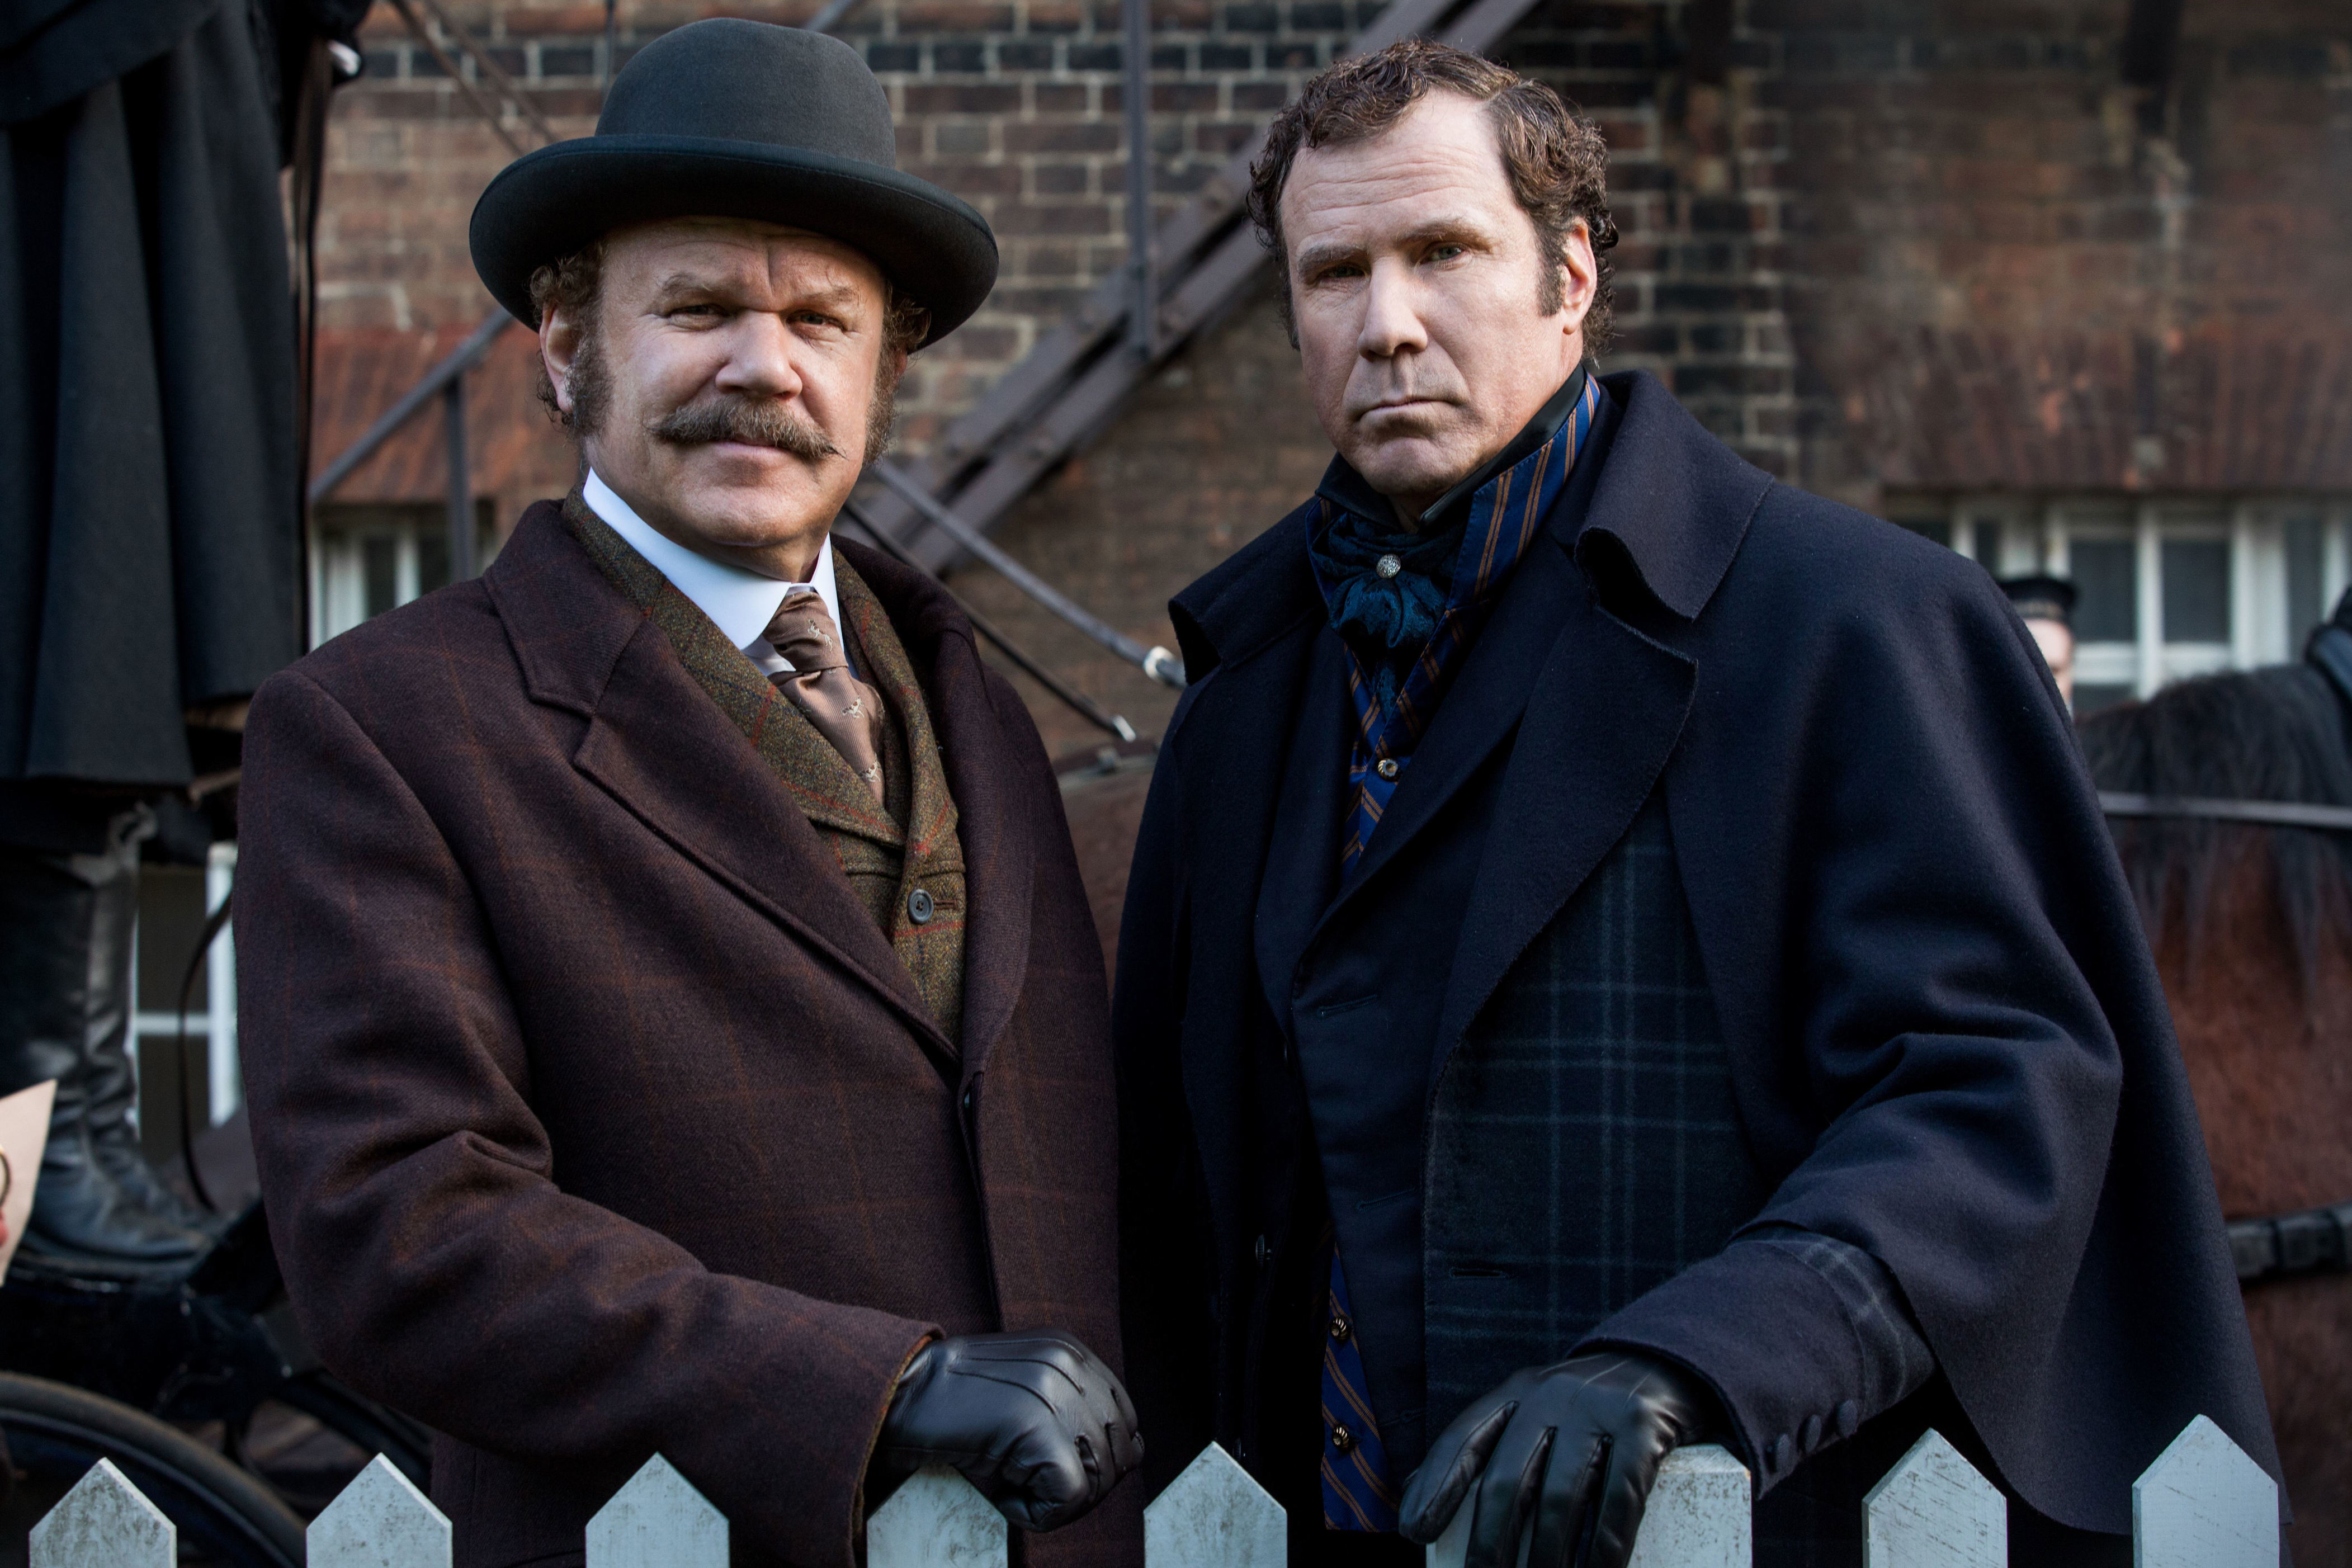 <p>In 2018, Will Ferrell and John C. Reilly joined forces again to star in the buddy comedy "Holmes & Watson." Will played Sherlock Holmes while John channeled Dr. Watson -- two pals tasked with finding the person behind a dangerous threat to Buckingham Palace. Despite their comedic chops, it was a box office bomb, grossing $41 million worldwide on a $42 million budget. </p><p>MORE: <a href="https://www.msn.com/en-us/community/channel/vid-kwt2e0544658wubk9hsb0rpvnfkttmu3tuj7uq3i4wuywgbakeva?item=flights%3Aprg-tipsubsc-v1a&ocid=social-peregrine&cvid=333aa5de5a654aa7a98a6930005e8f60&ei=2">Follow Wonderwall on MSN for more fun celebrity & entertainment photo galleries and content</a></p>